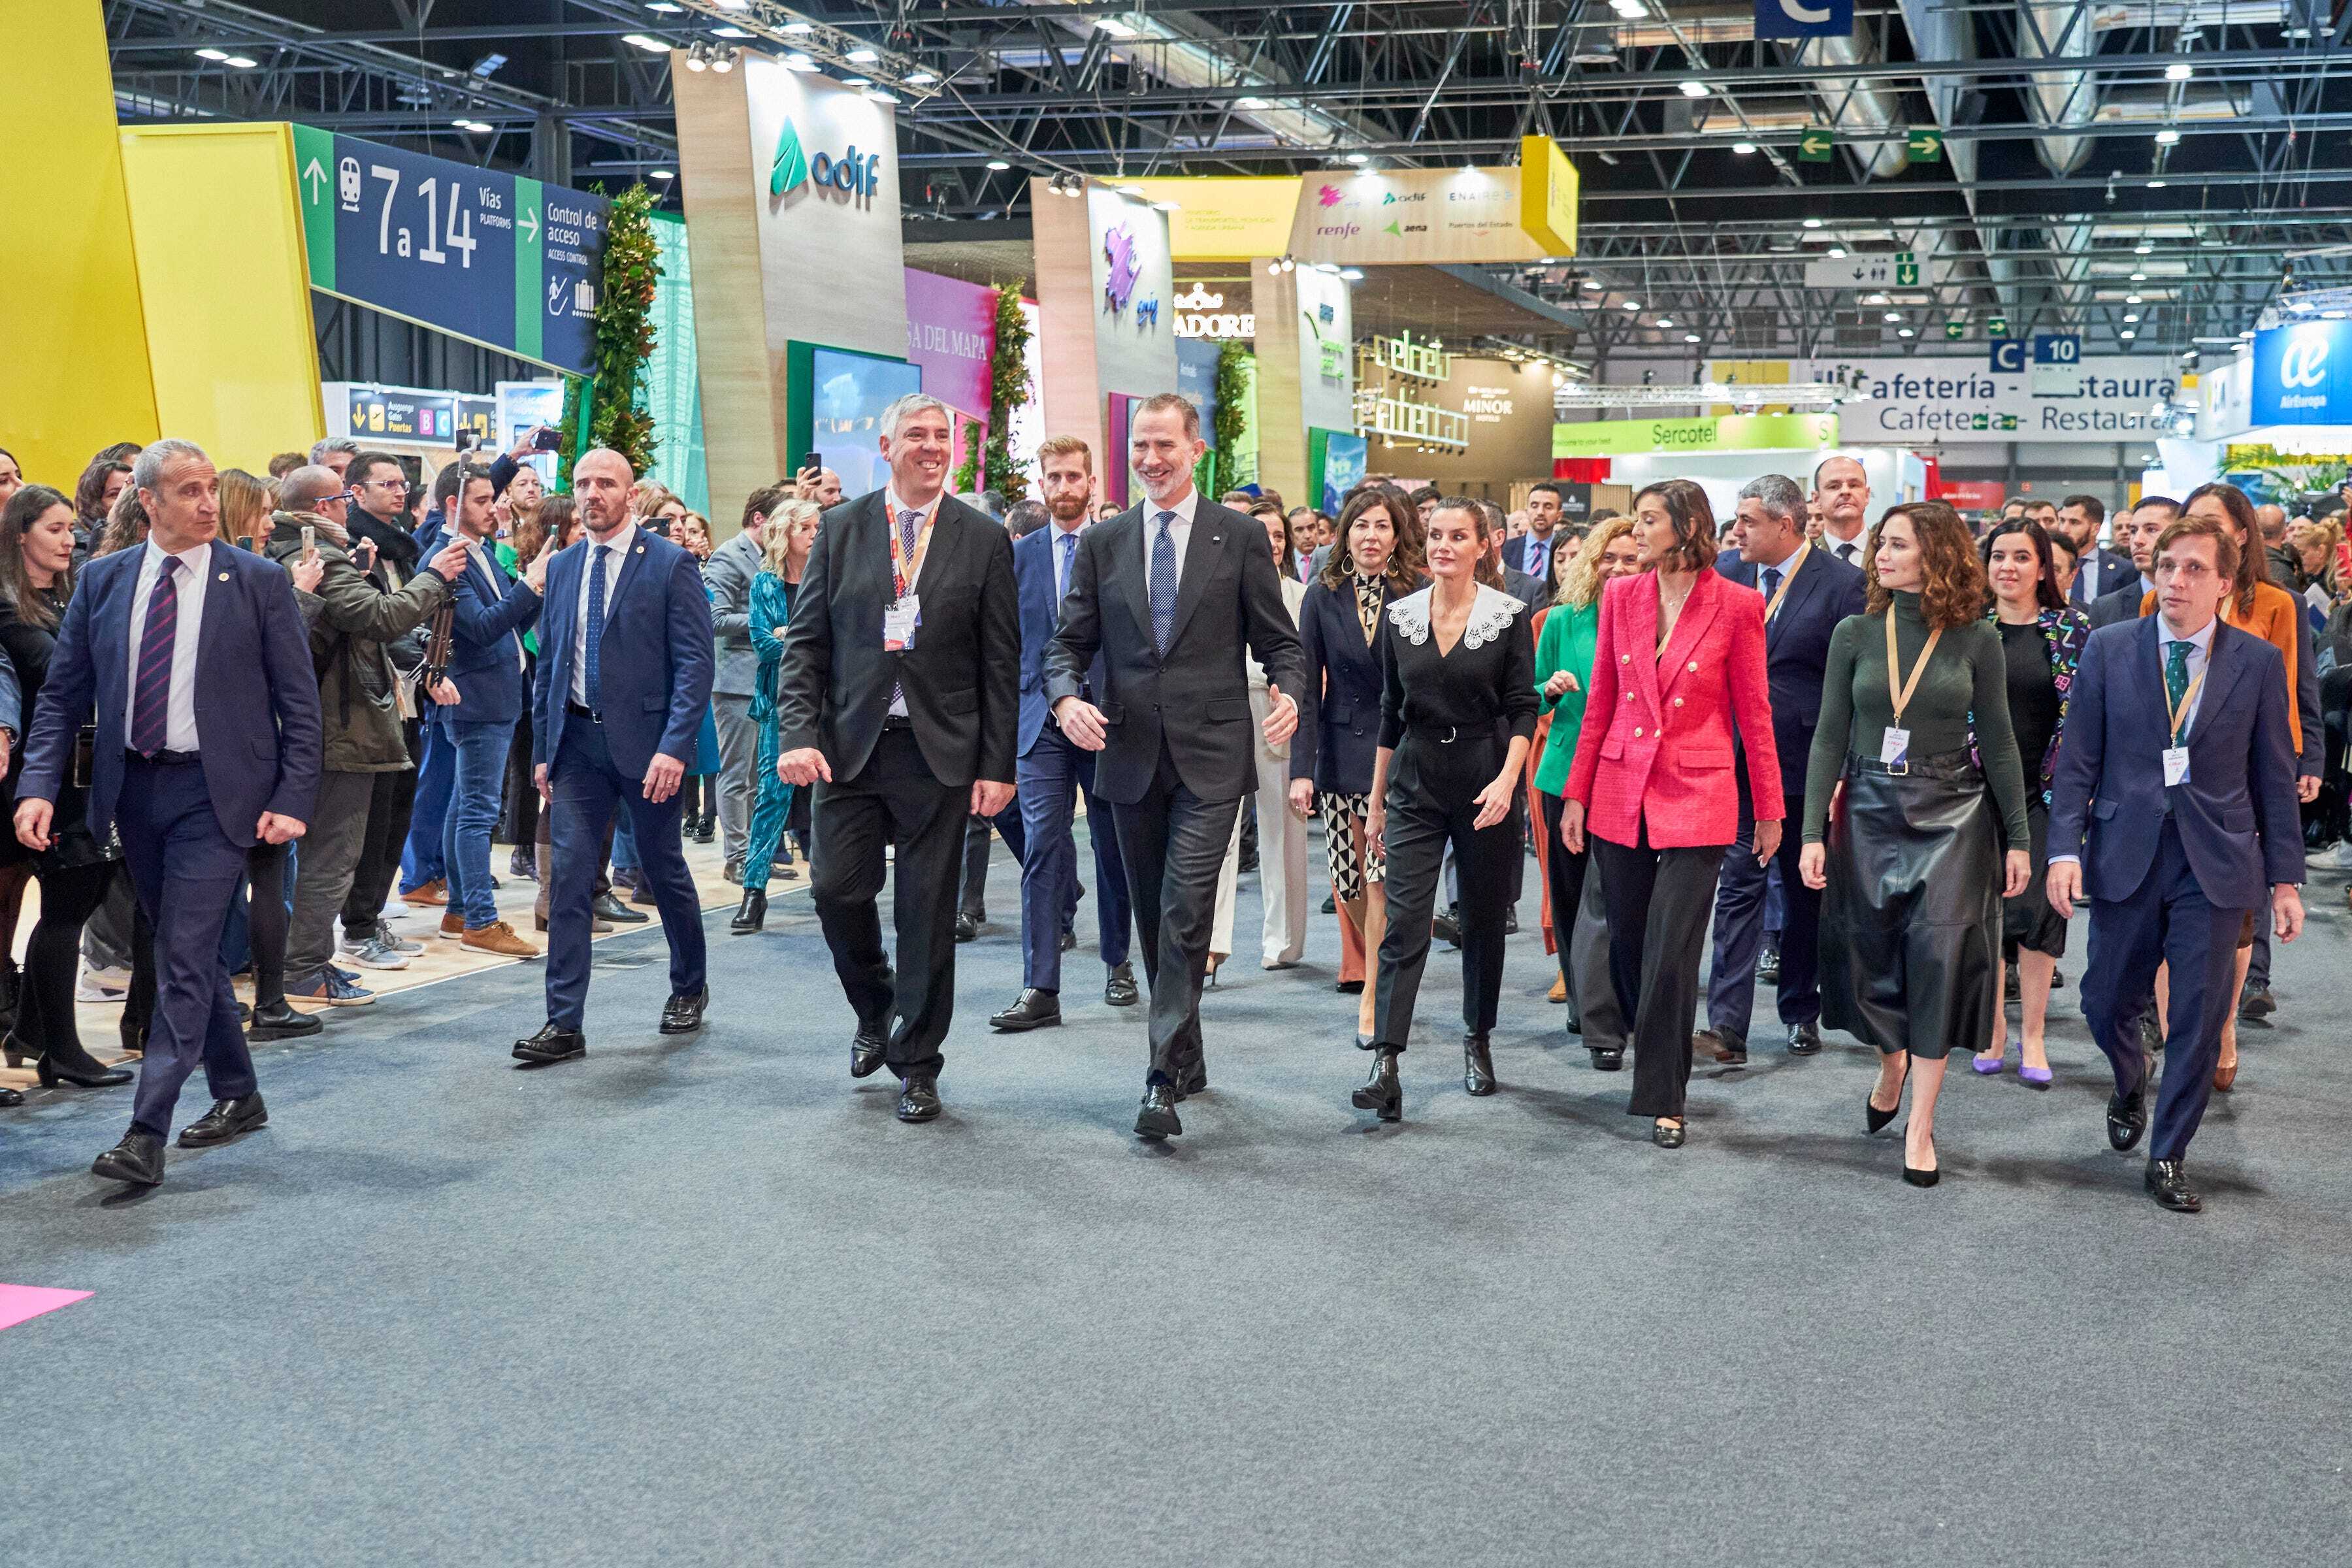 GOVERSYS lands at FITUR 23 awakening the interest of investors and VCs